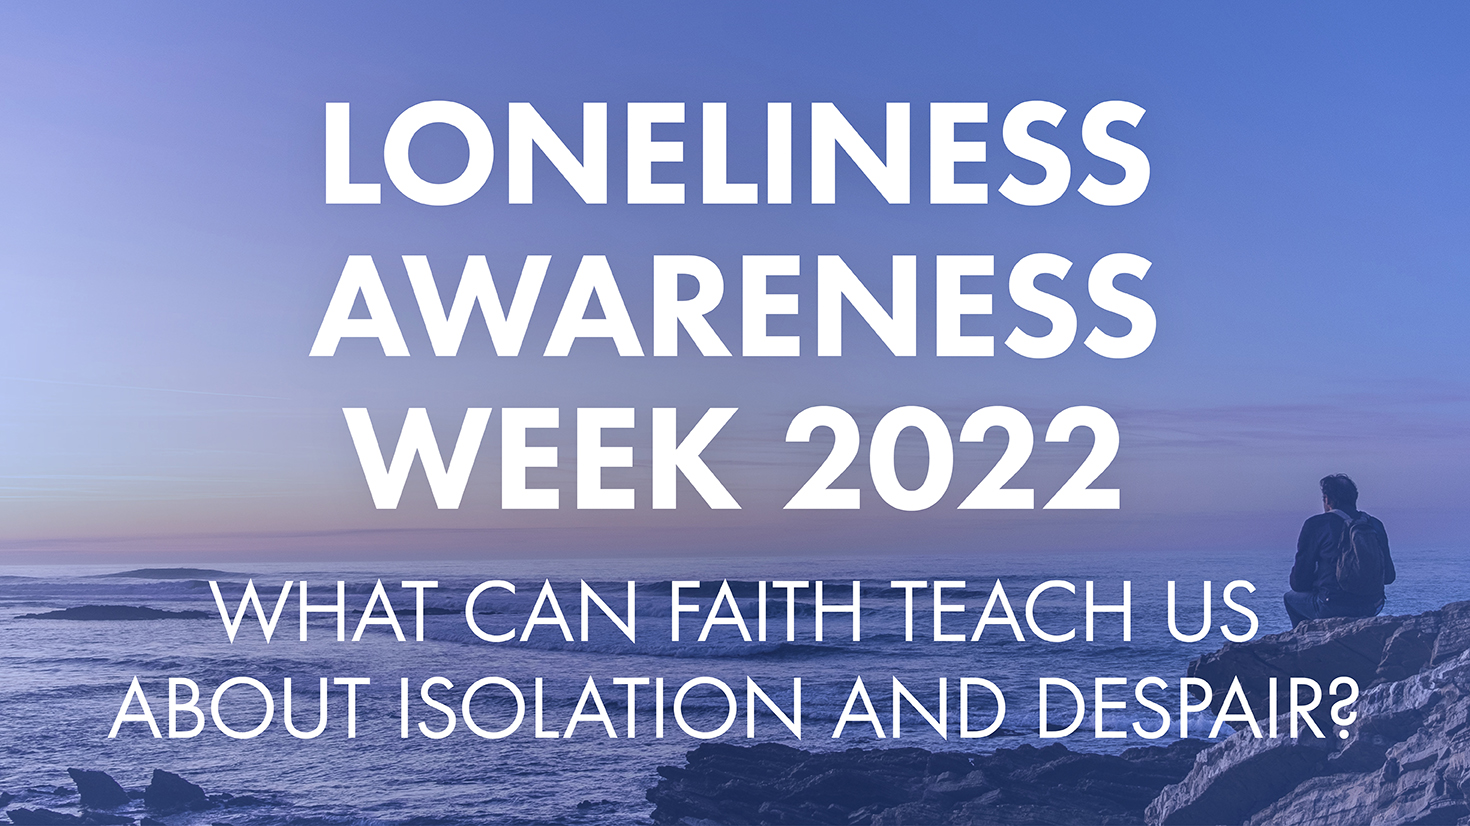 Loneliness Awareness Week 2022: what can faith teach us about isolation and despair?